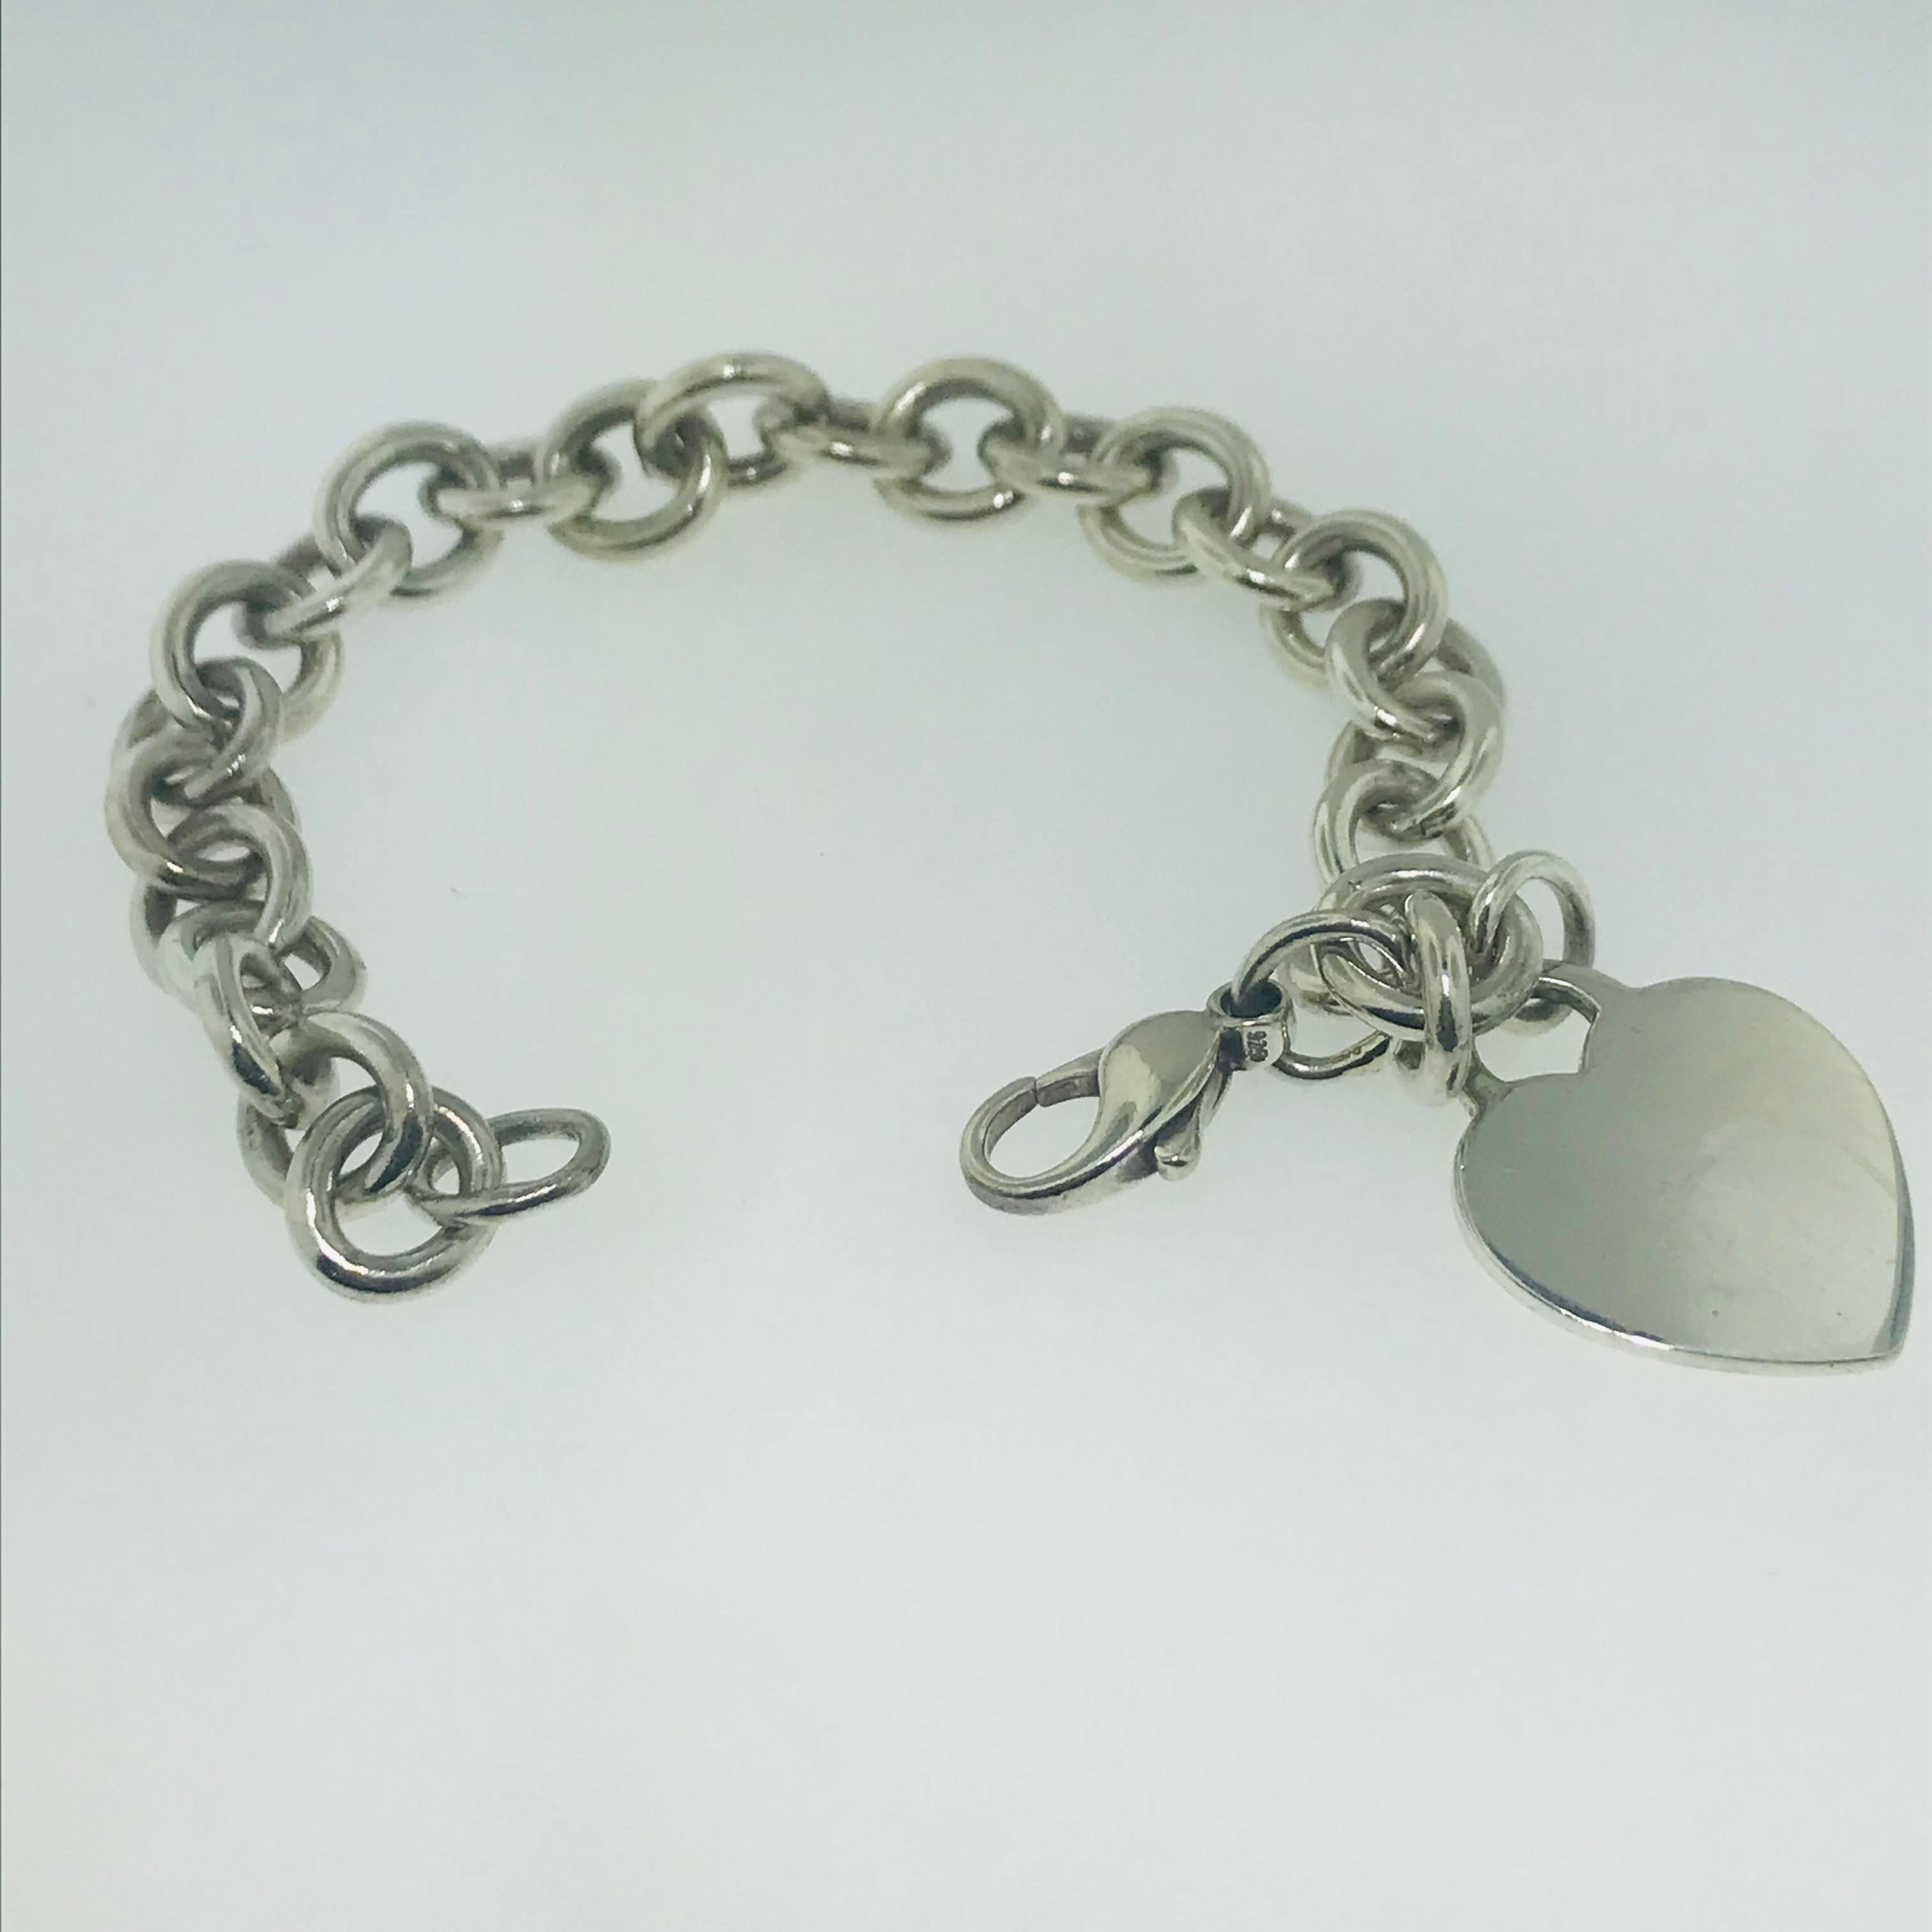 Artisan Tiffany & Co. Charm Bracelet with Heart Charm in Sterling Silver